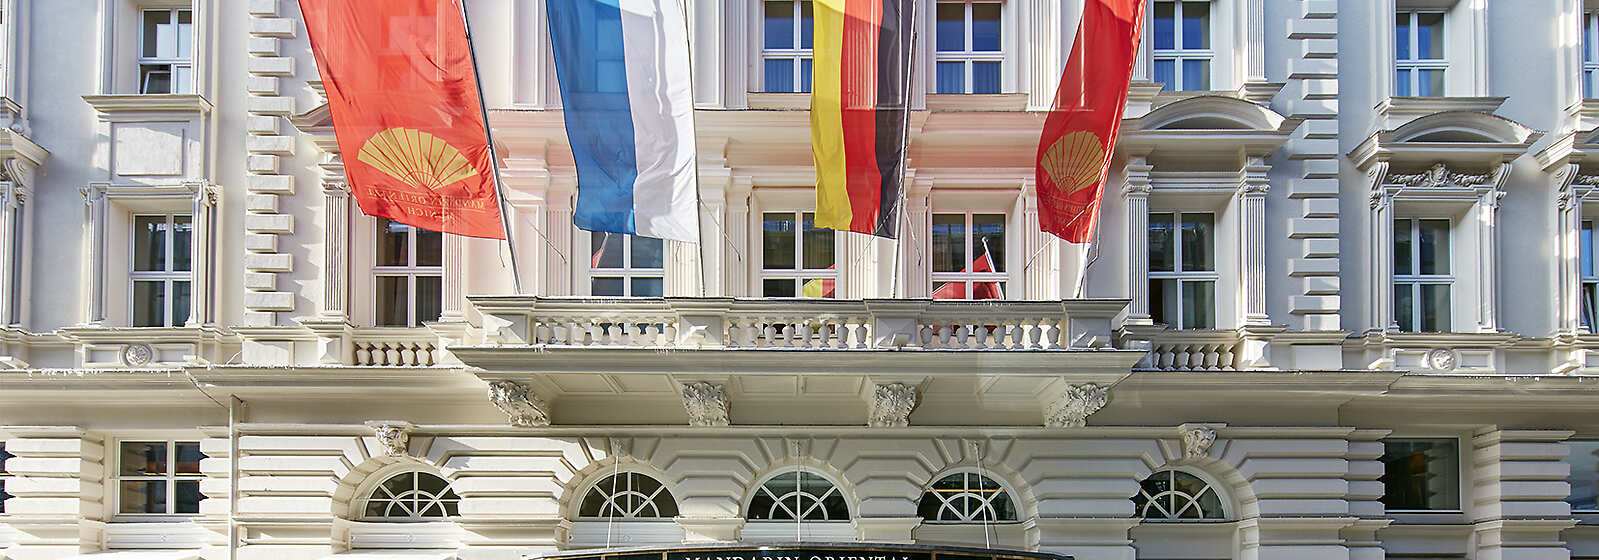 A small, yet perfectly formed hotel, Mandarin Oriental, Munich offers five-star luxury